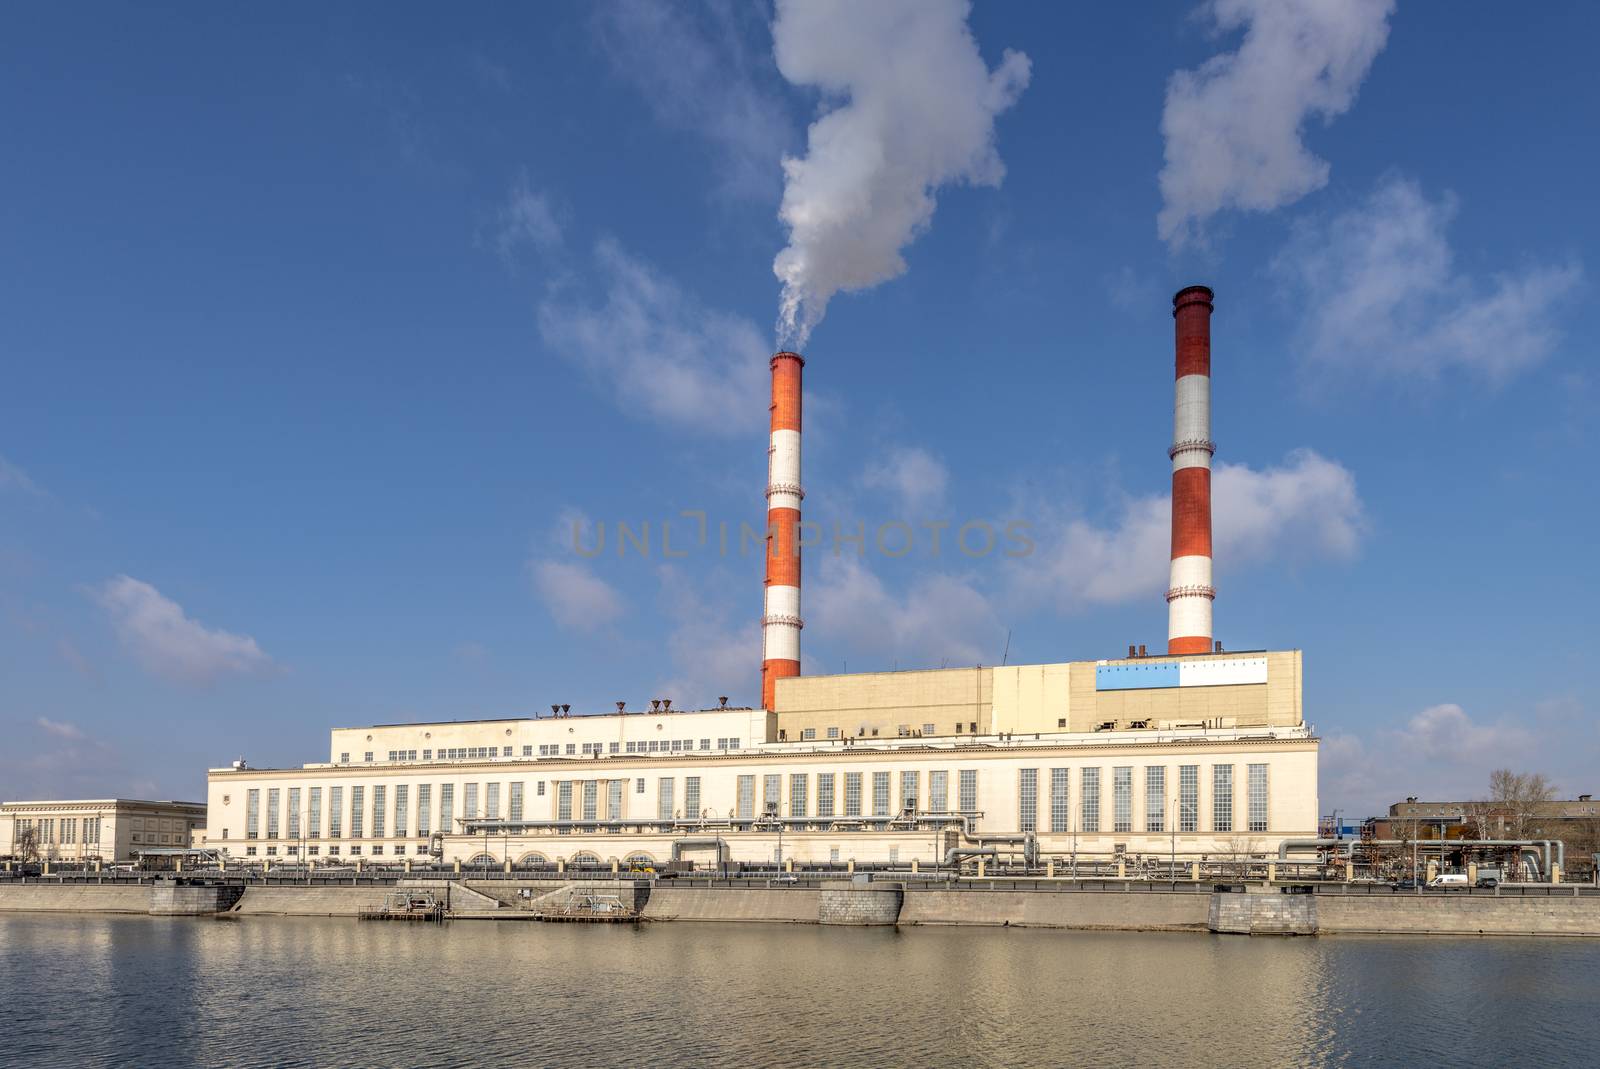 Thermal power plants CHP and its pipe